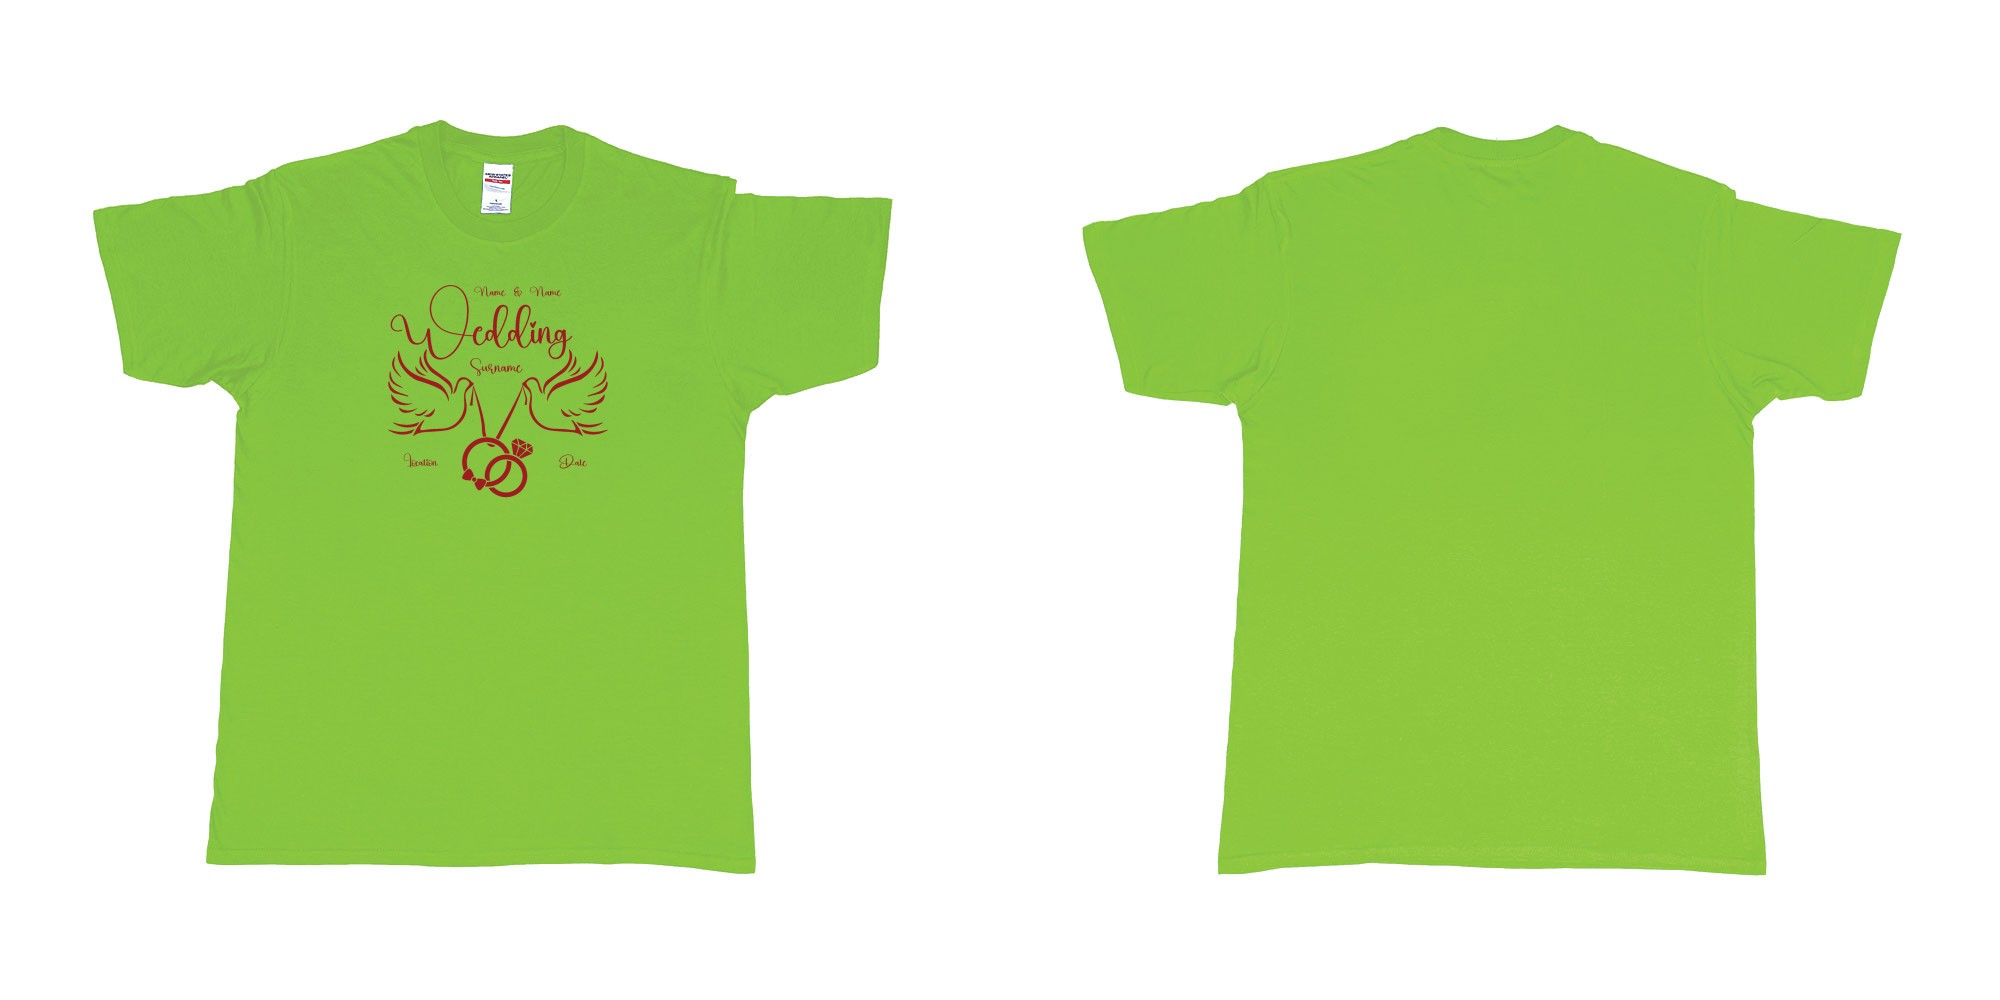 Custom tshirt design wedding doves holding rings in fabric color lime choice your own text made in Bali by The Pirate Way